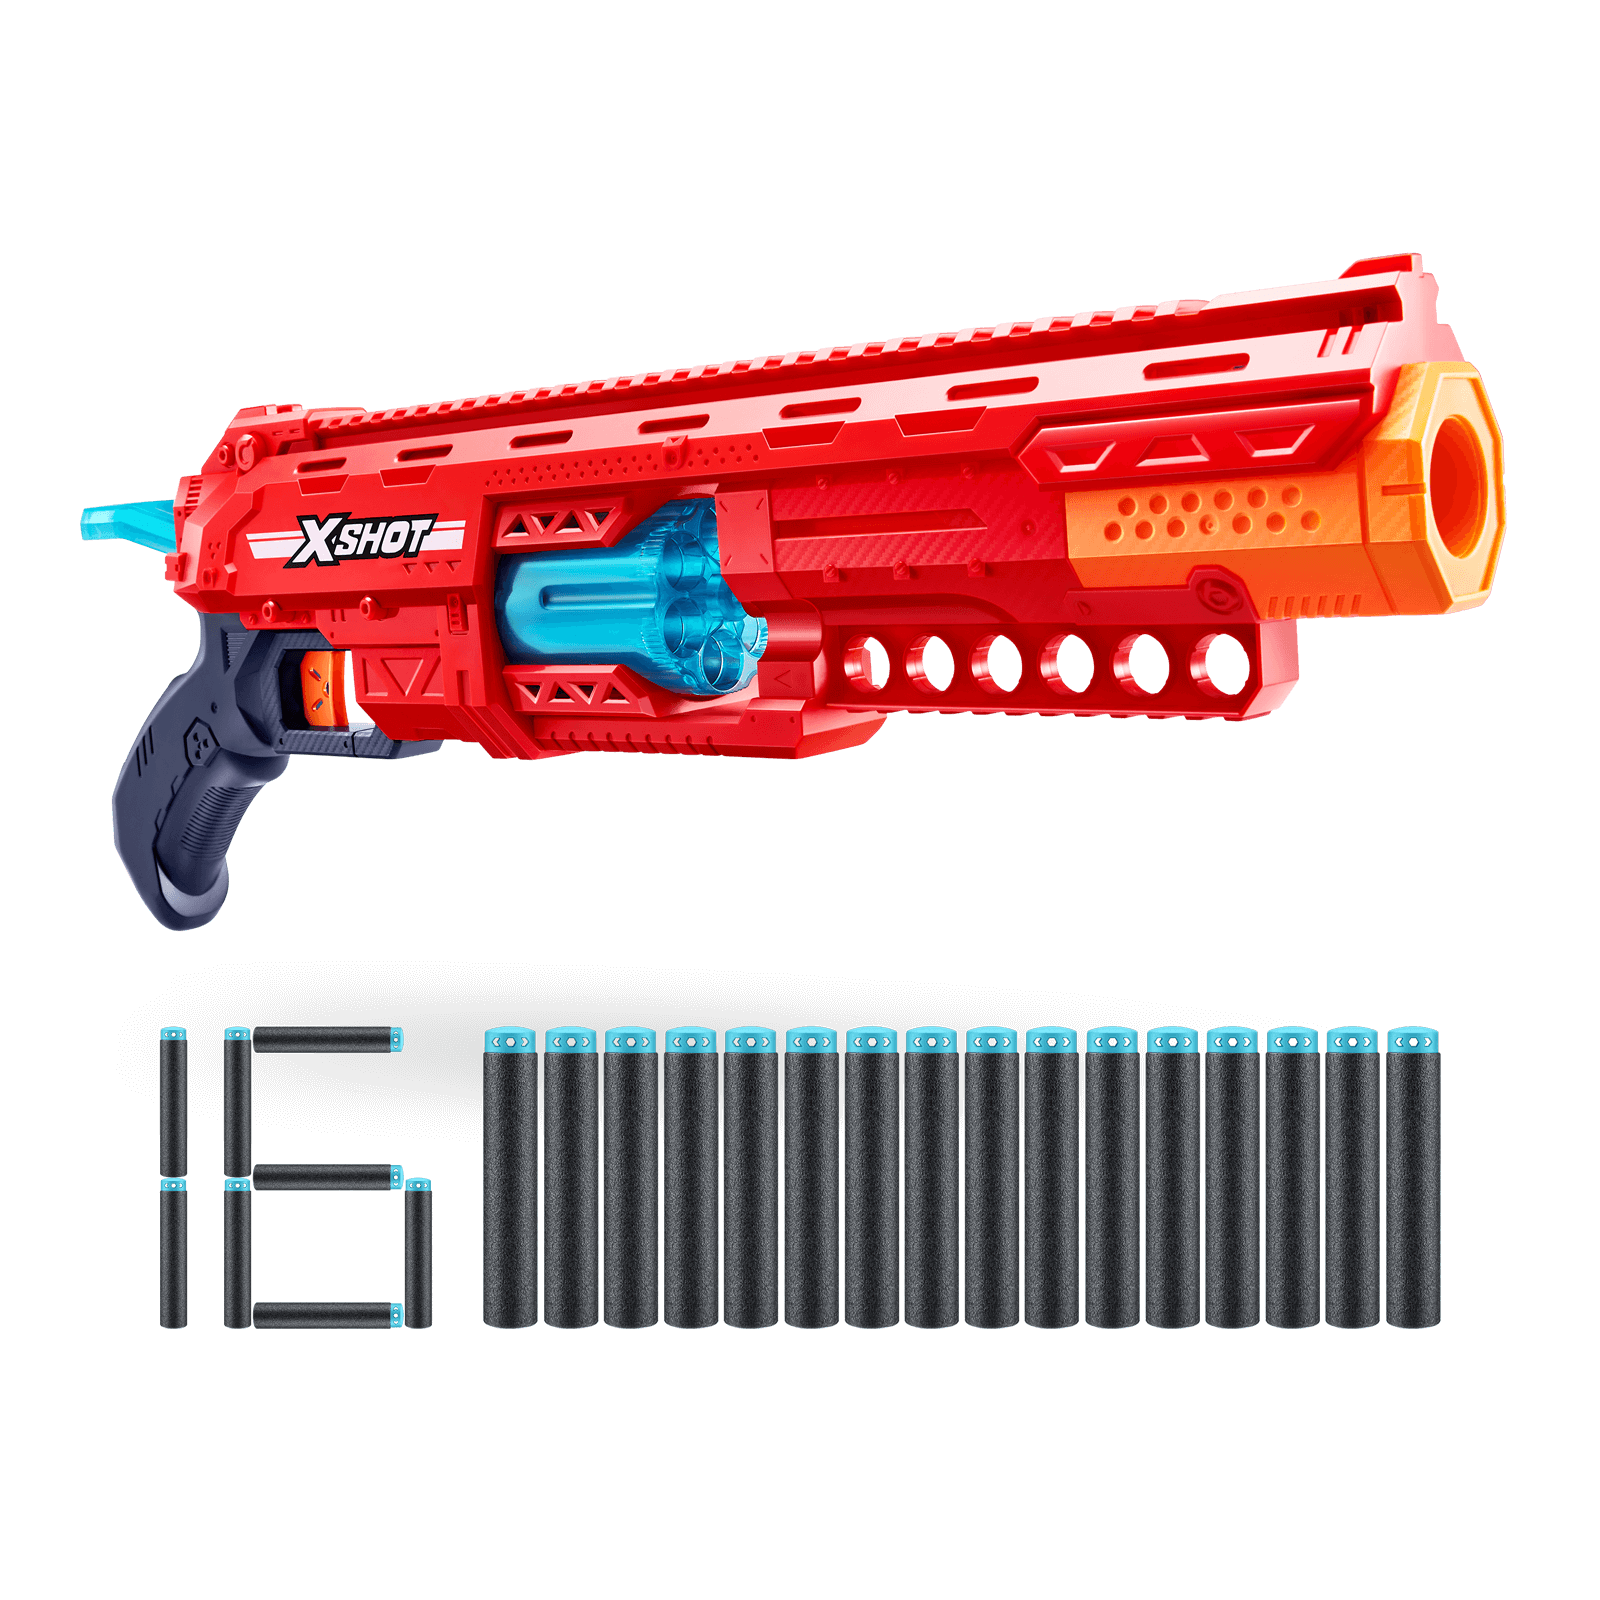  Excel Vigilante (12 Darts + 4 Shooting Targets) by ZURU, X-Shot  Red Foam Dart Blaster, Toy Blaster, Twin Barrels Pump Action, Quick-Fire,  Toys for Kids, Teens, Adults (Red) : Sports 